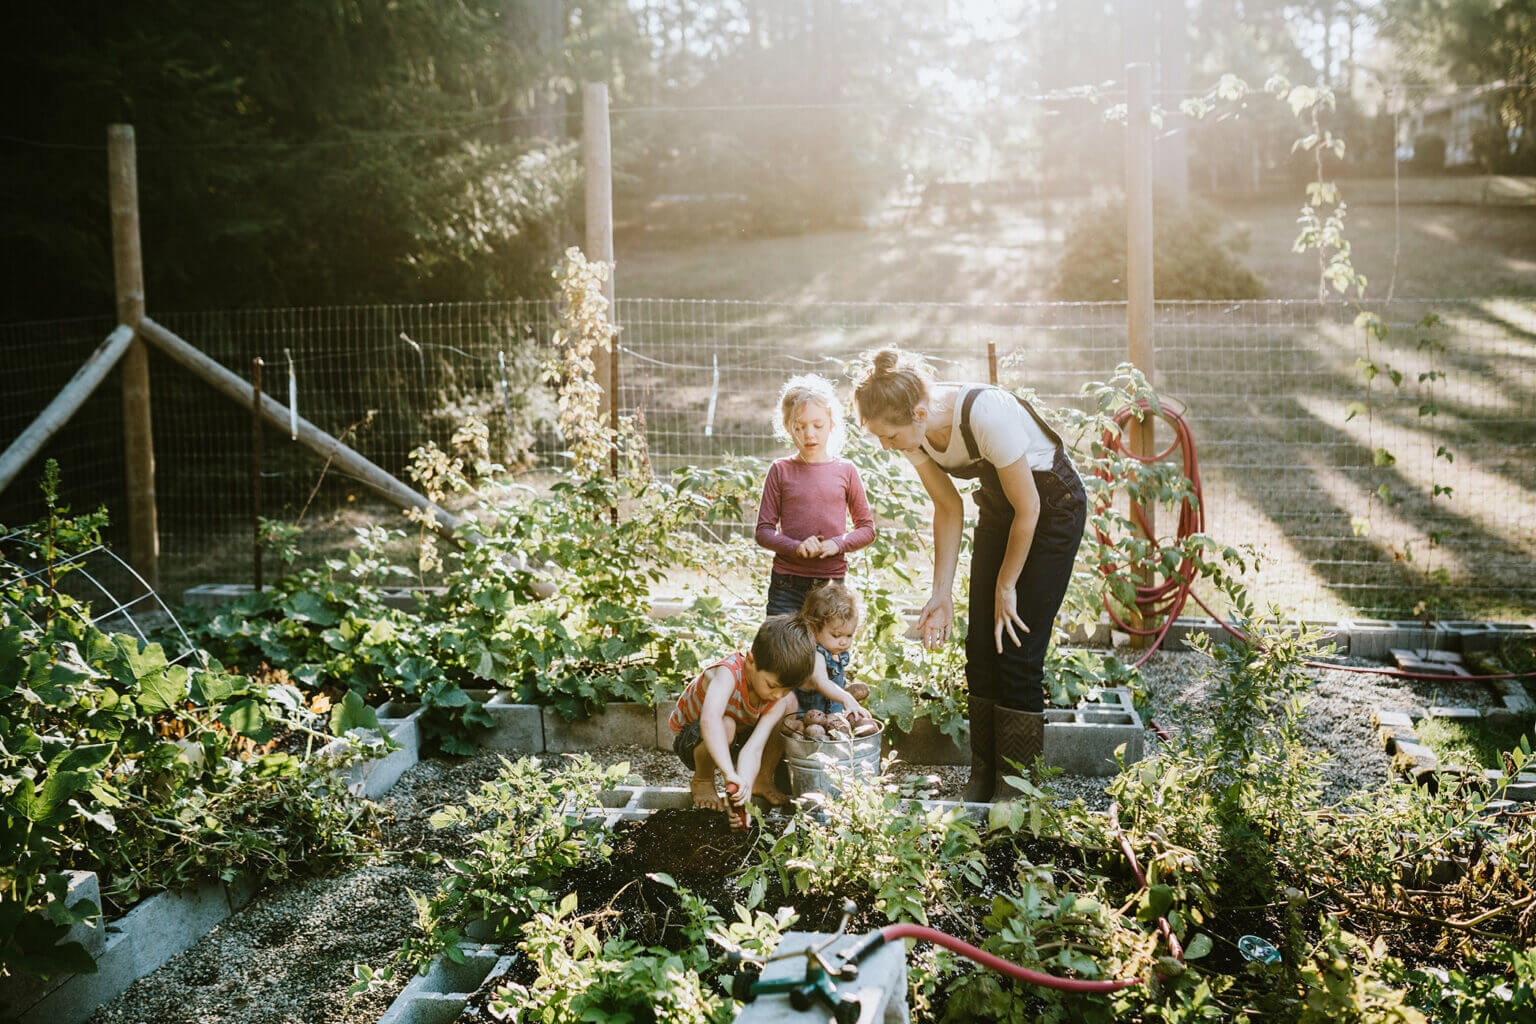 During the pandemic, many parents spent time with their children while gardening. (Getty Images)